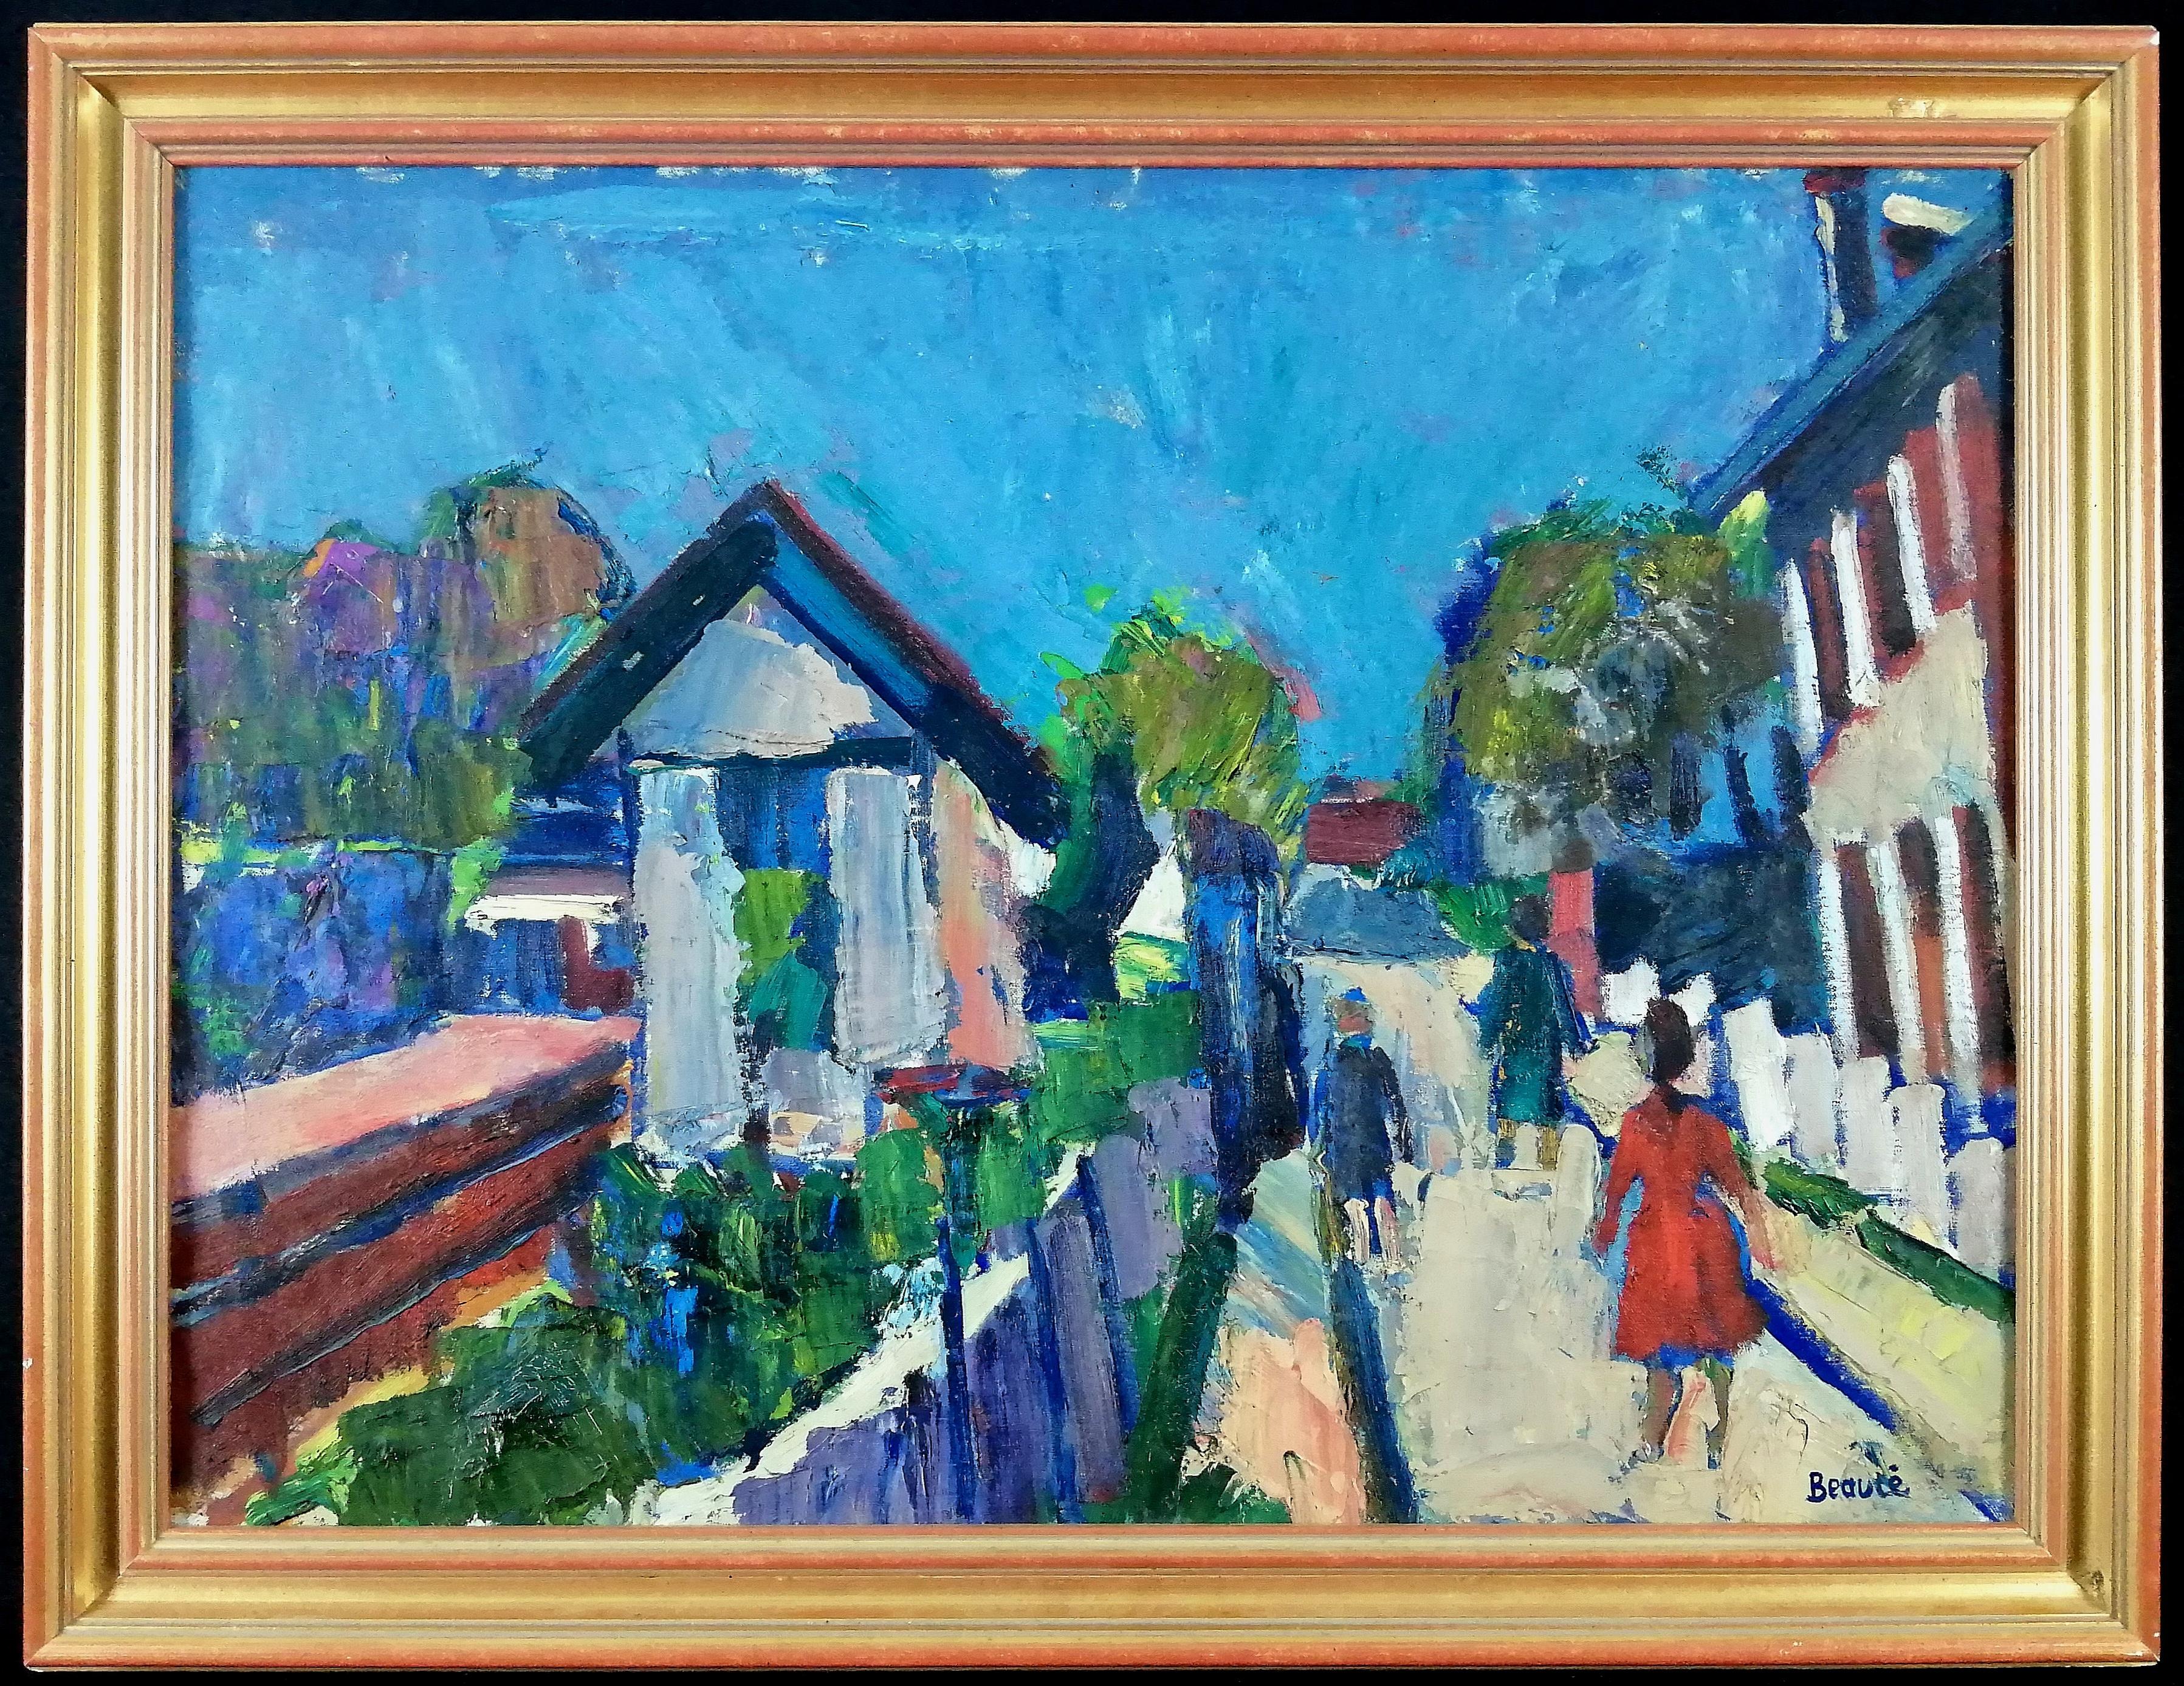 A beautiful large 1950's French expressionist oil on canvas depicting locals taking an afternoon stroll, by Paris painter André Beaucé. Excellent quality work in very good condition. Signed lower right.

Artist: André Beaucé (French,